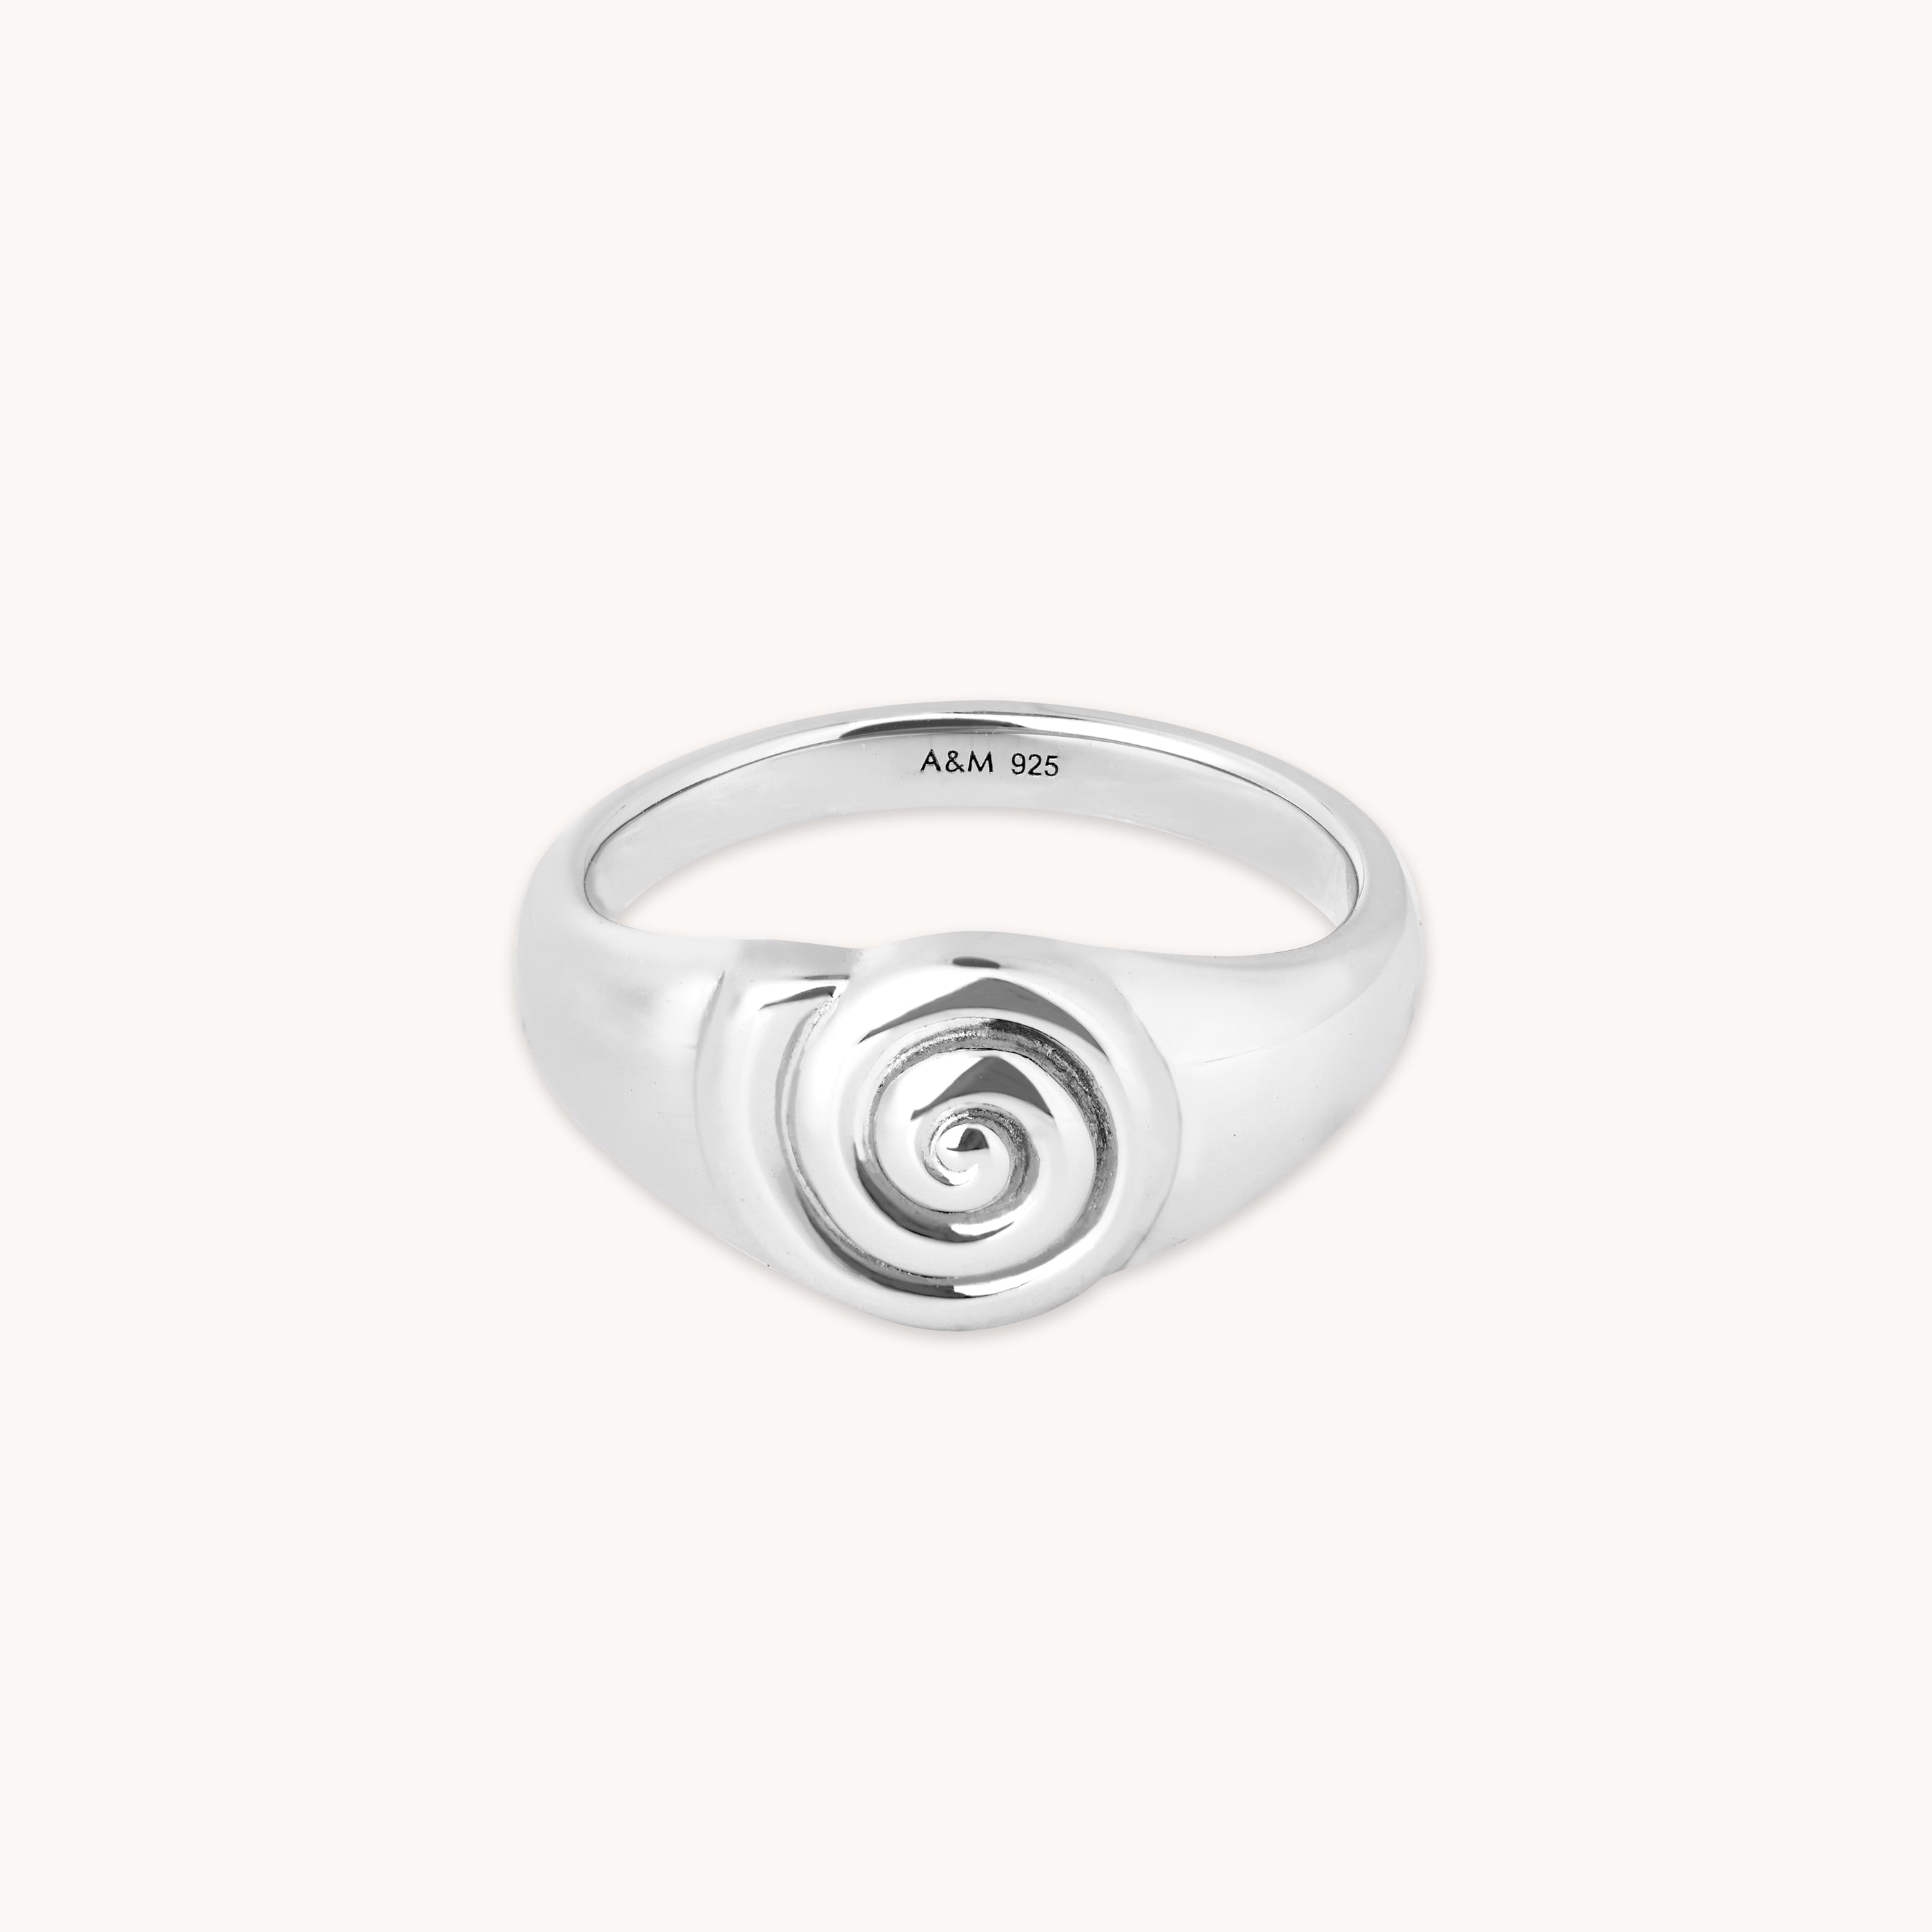 Shell Signet Ring in Silver